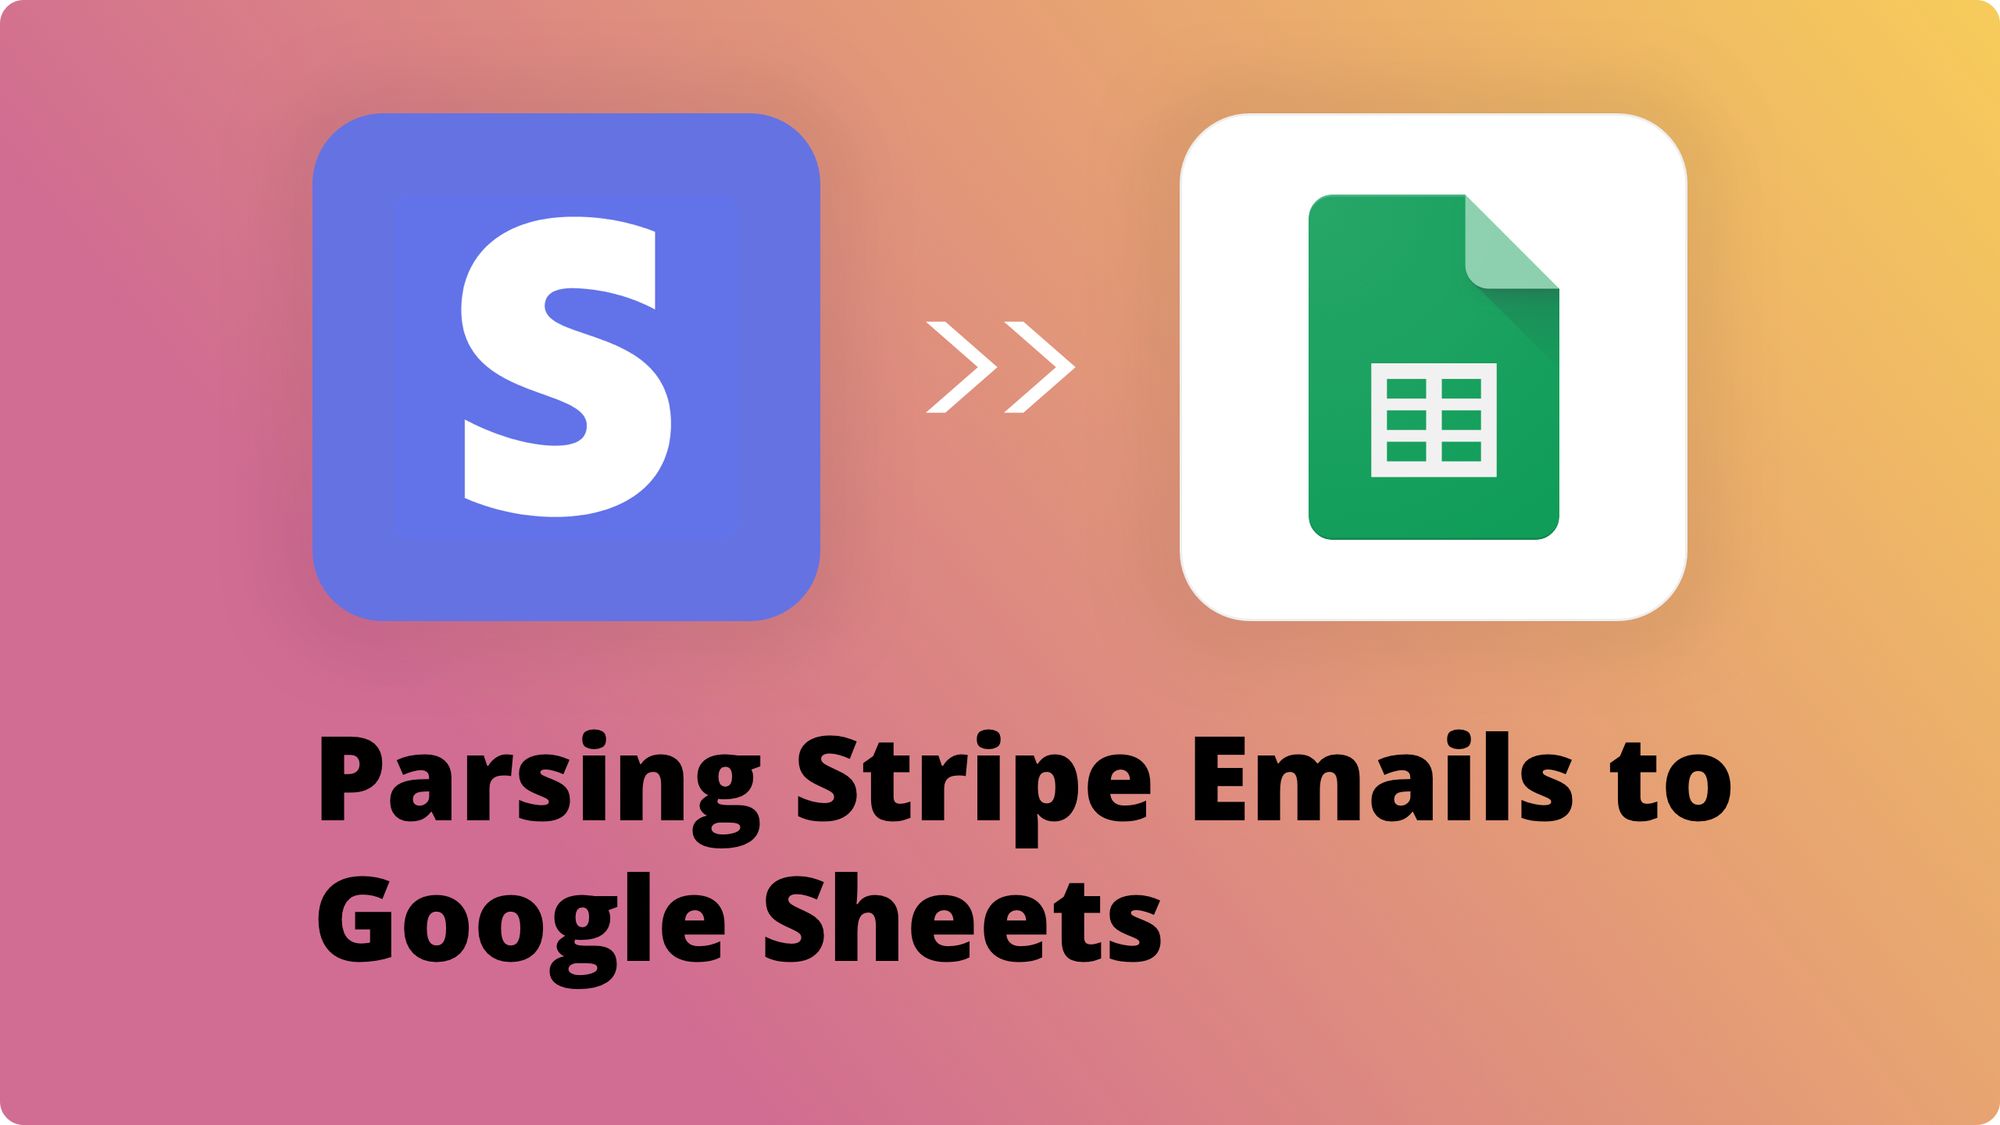 How to Extract Data From Stripe Emails?